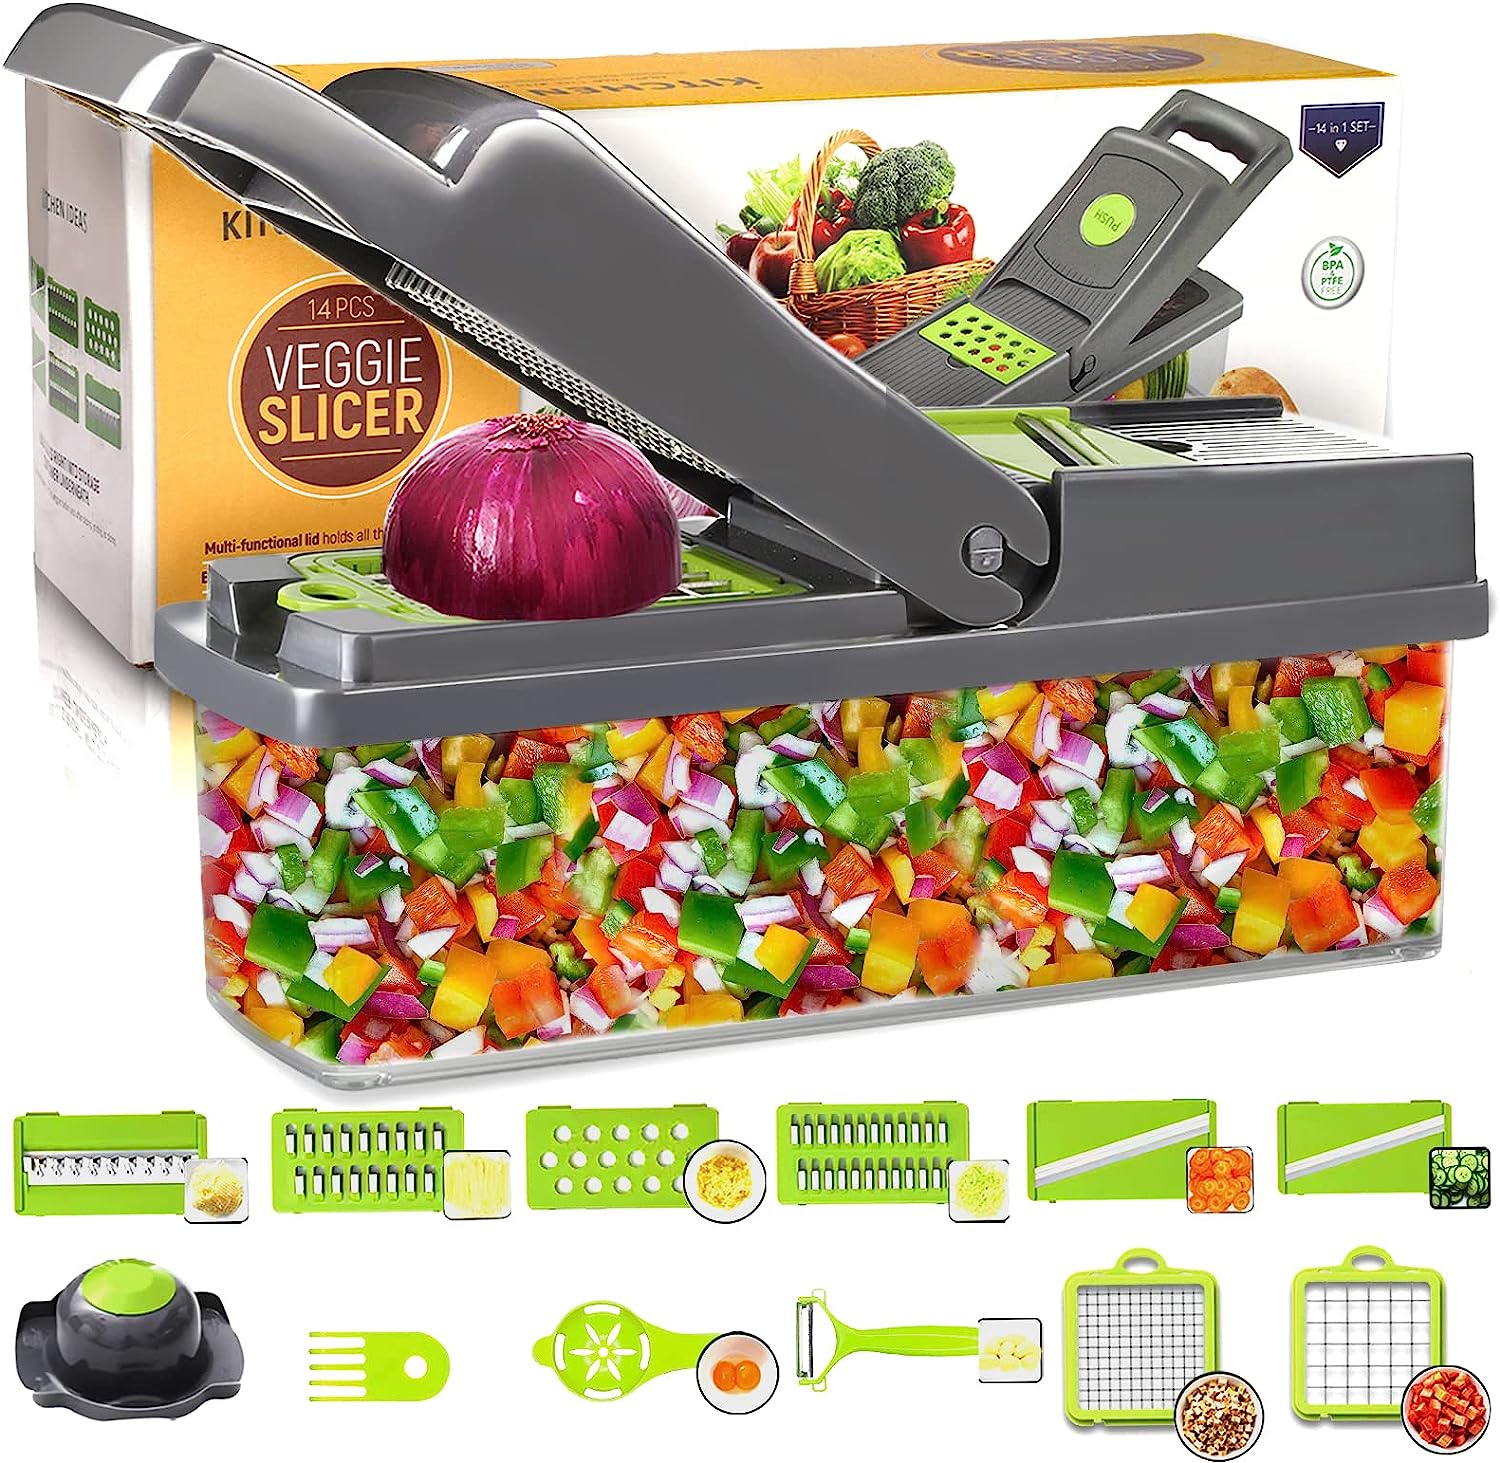 16/22pcs Vegetable Chopper Kit, Multi-functional Fruit Slicer, Manual Food  Chopper, Vegetables Slicer, Slicer With Container And Hand Guard, Onion  Chopper, Potato Slicer,peeler, Kitchen Gadget